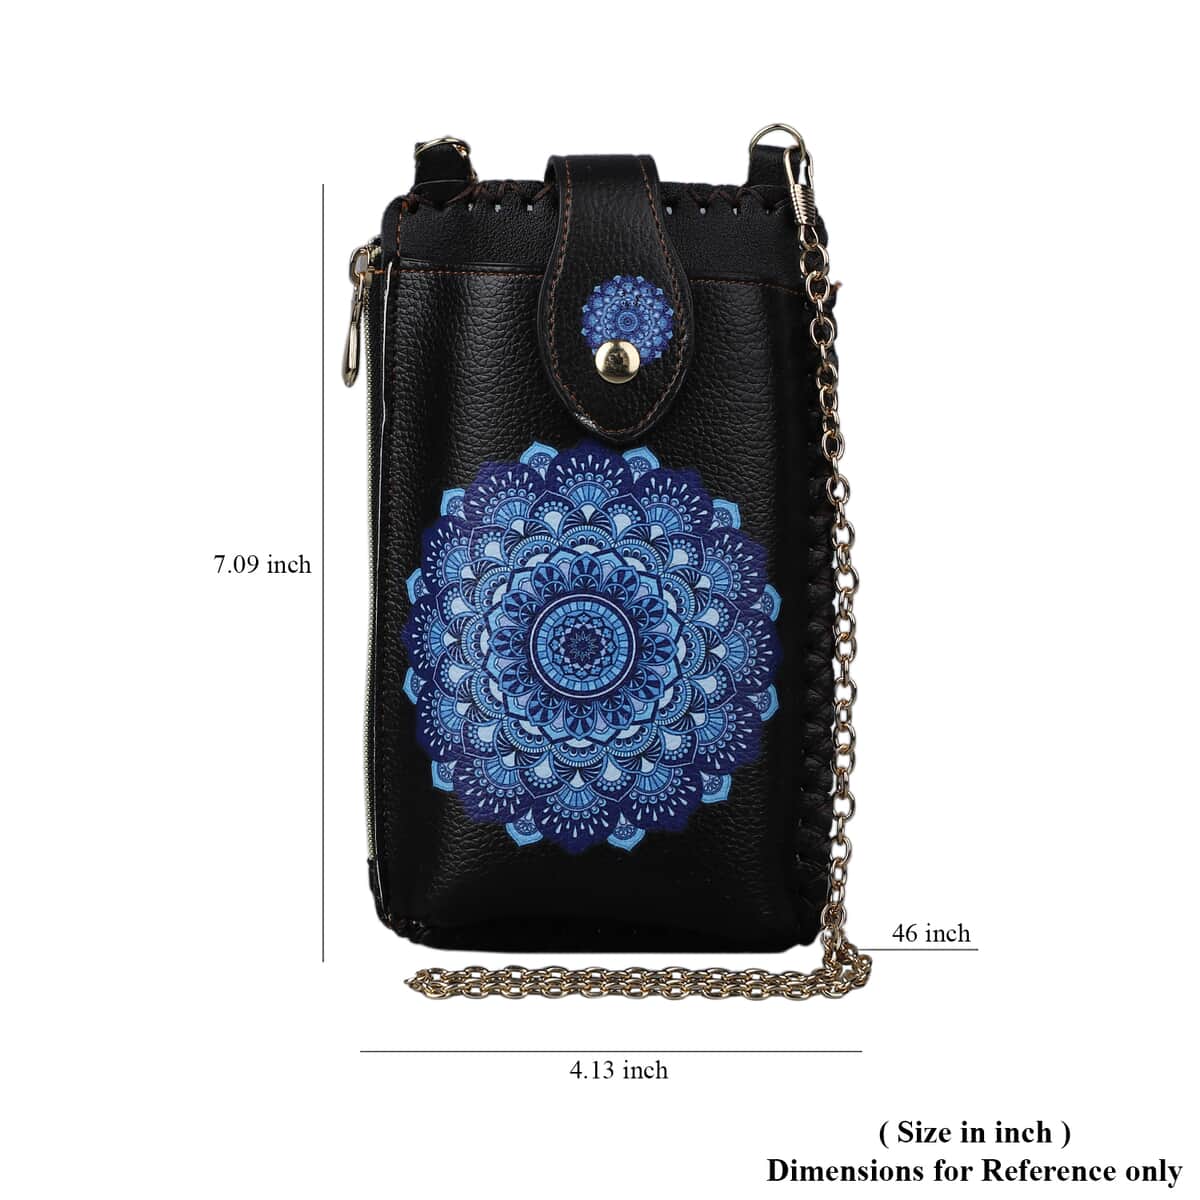 HongKong Closeout Stylish and Classic Paper Cuts Pattern Cell Phone Bag with Chain Shoulder Strap - Black and Blue image number 6